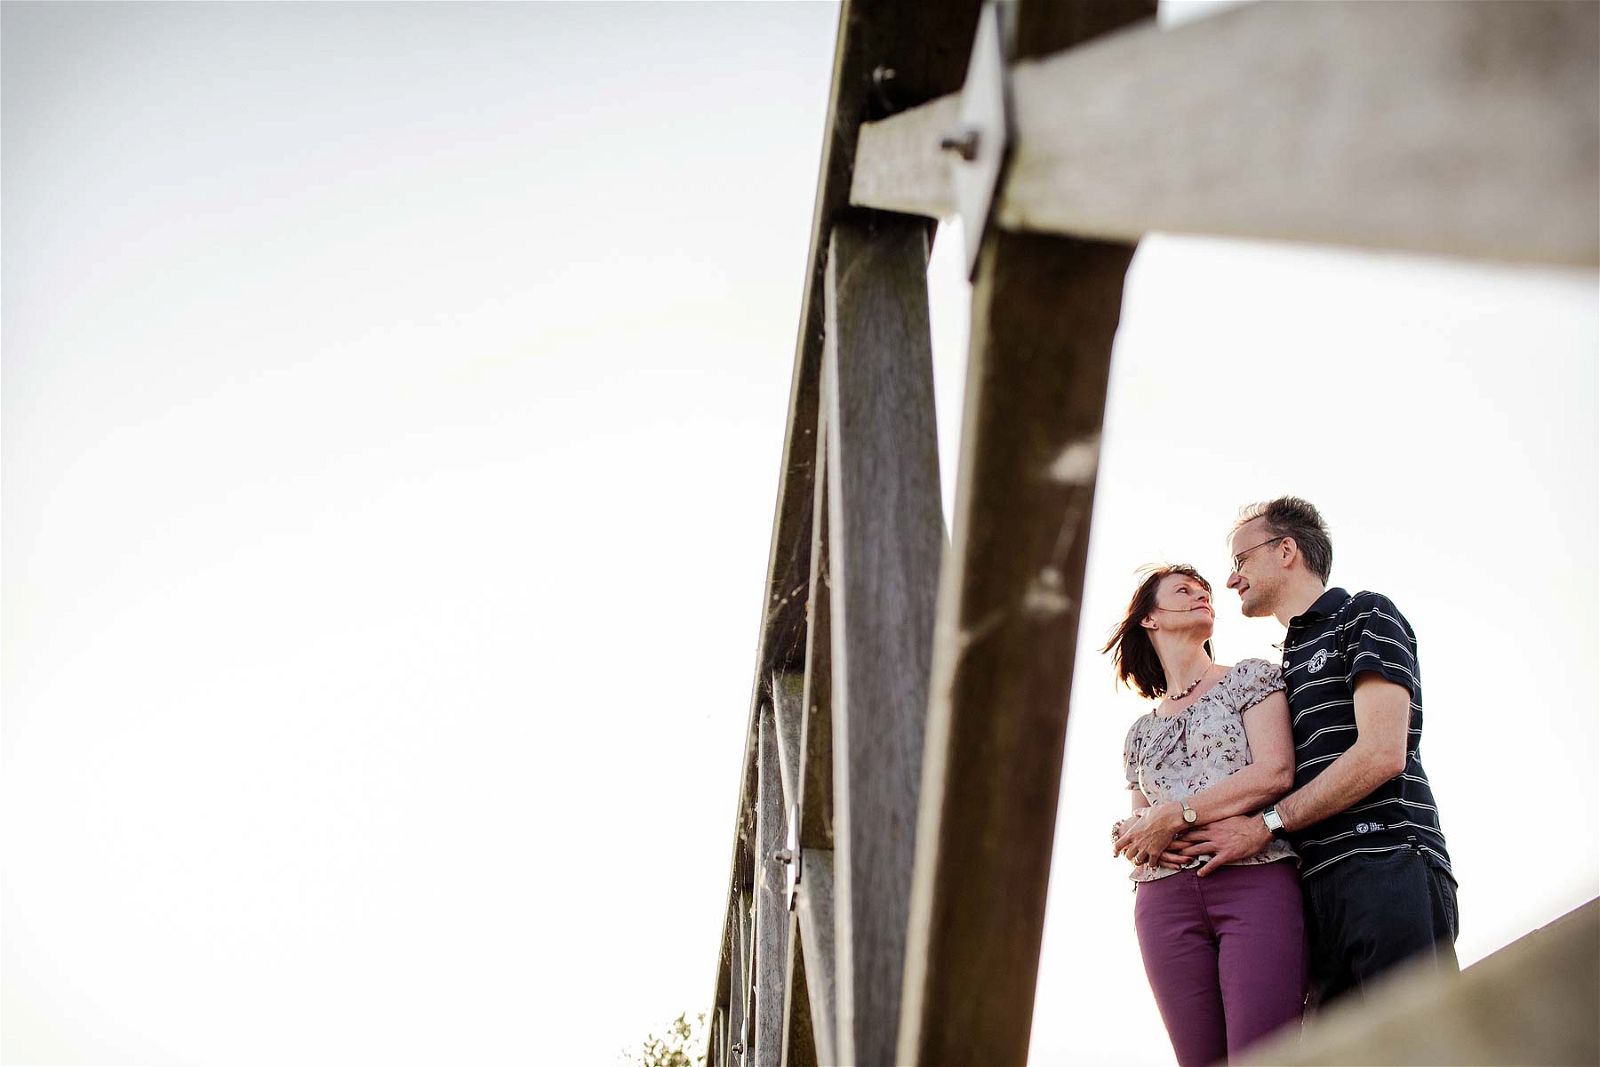 Utilising the setting of Barton Marina in Burton upon Trent for a relaxed evening engagement portrait session with Derbyshire Reportage Wedding Photographer Stuart James